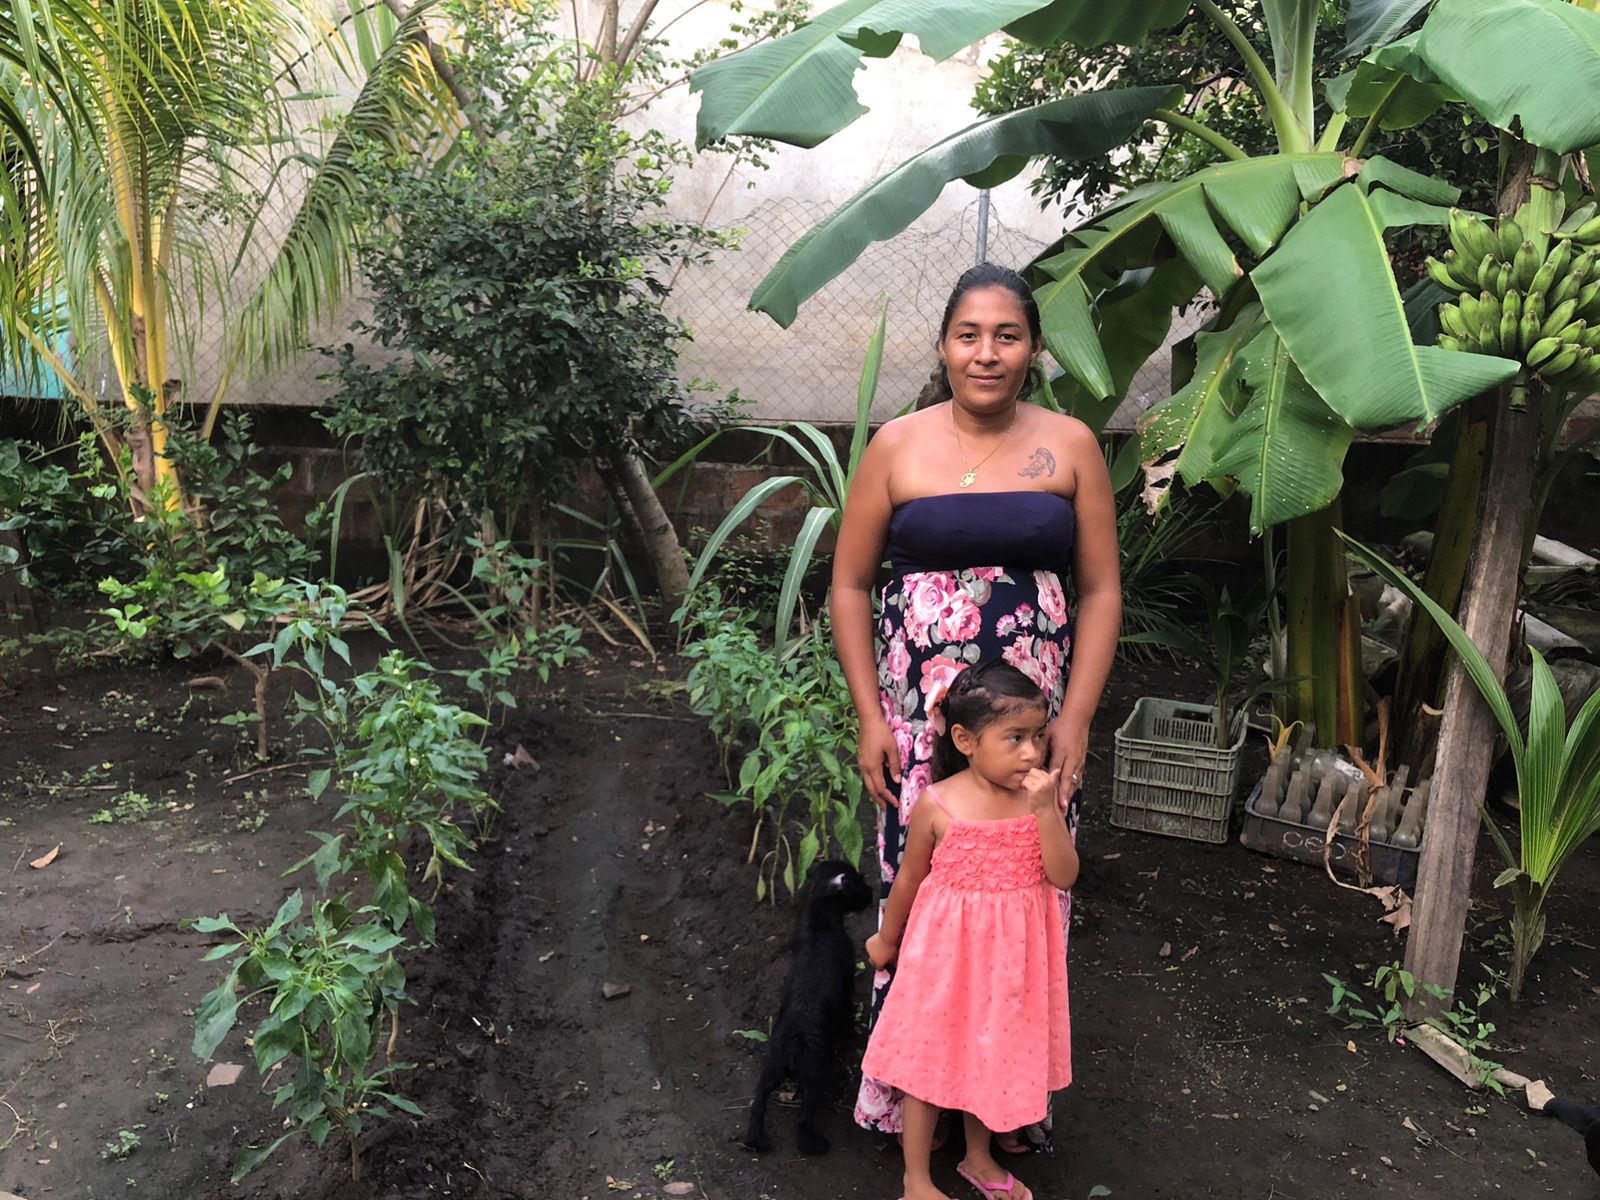 An interview with Fabiola Chavarria, Mother and Farmer